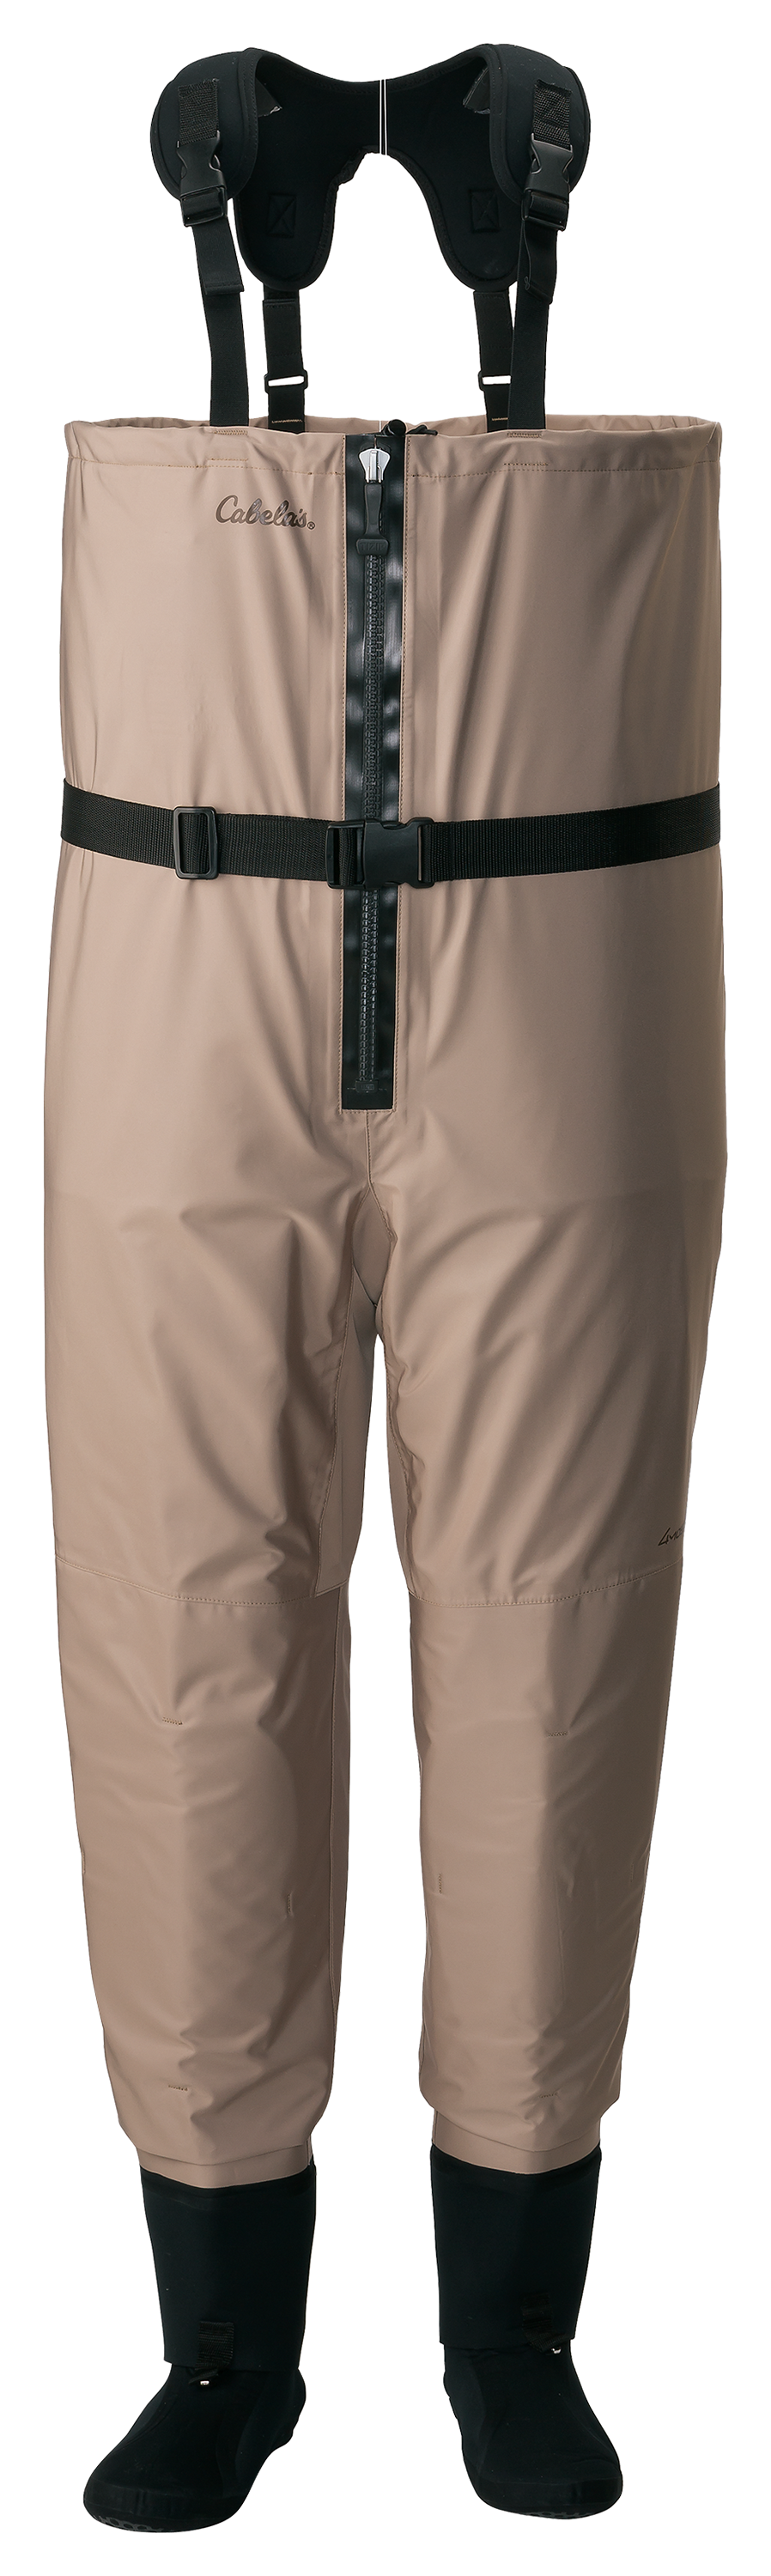 Cabela's Premium Breathable Stocking-Foot Pant Waders for Men